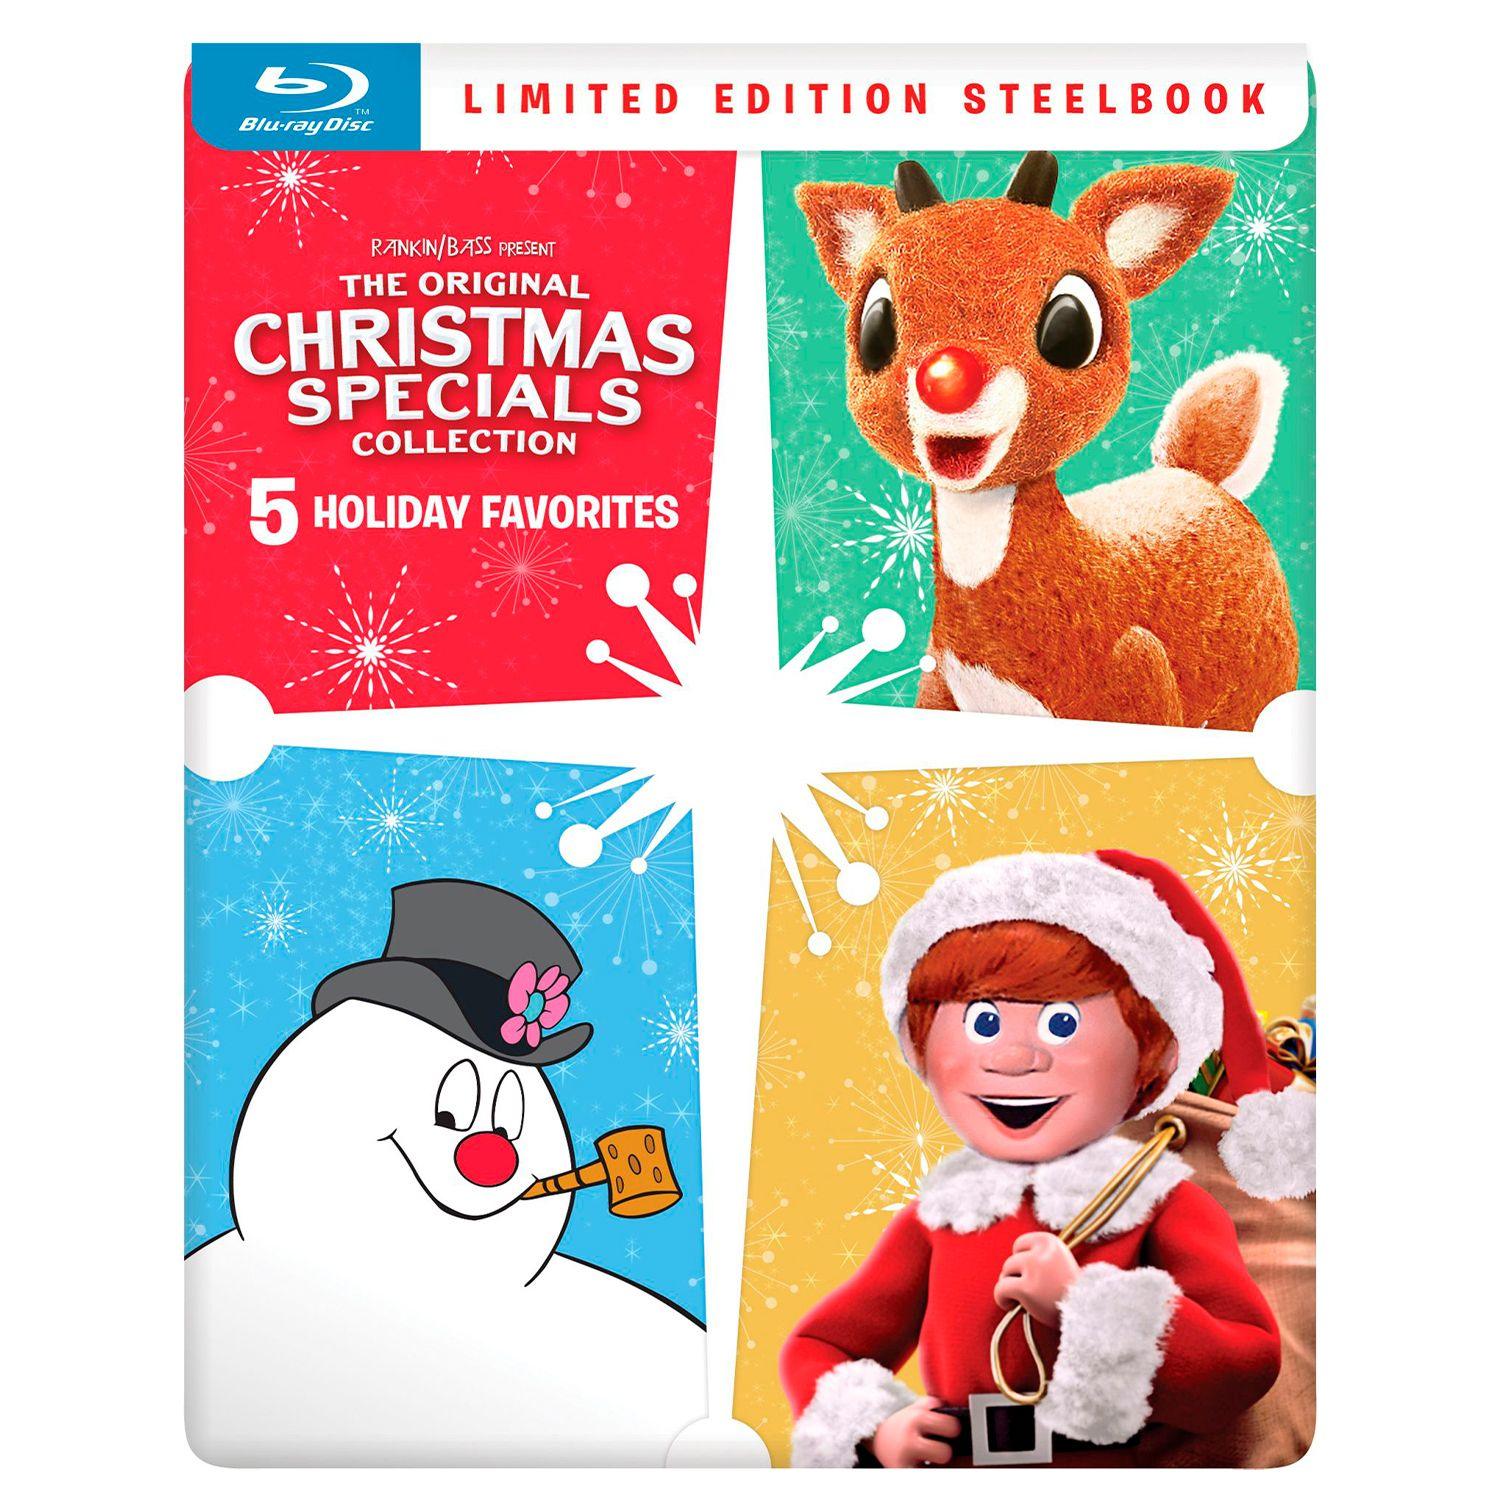 The Original Christmas Specials Collection (Blu-ray) SteelBook